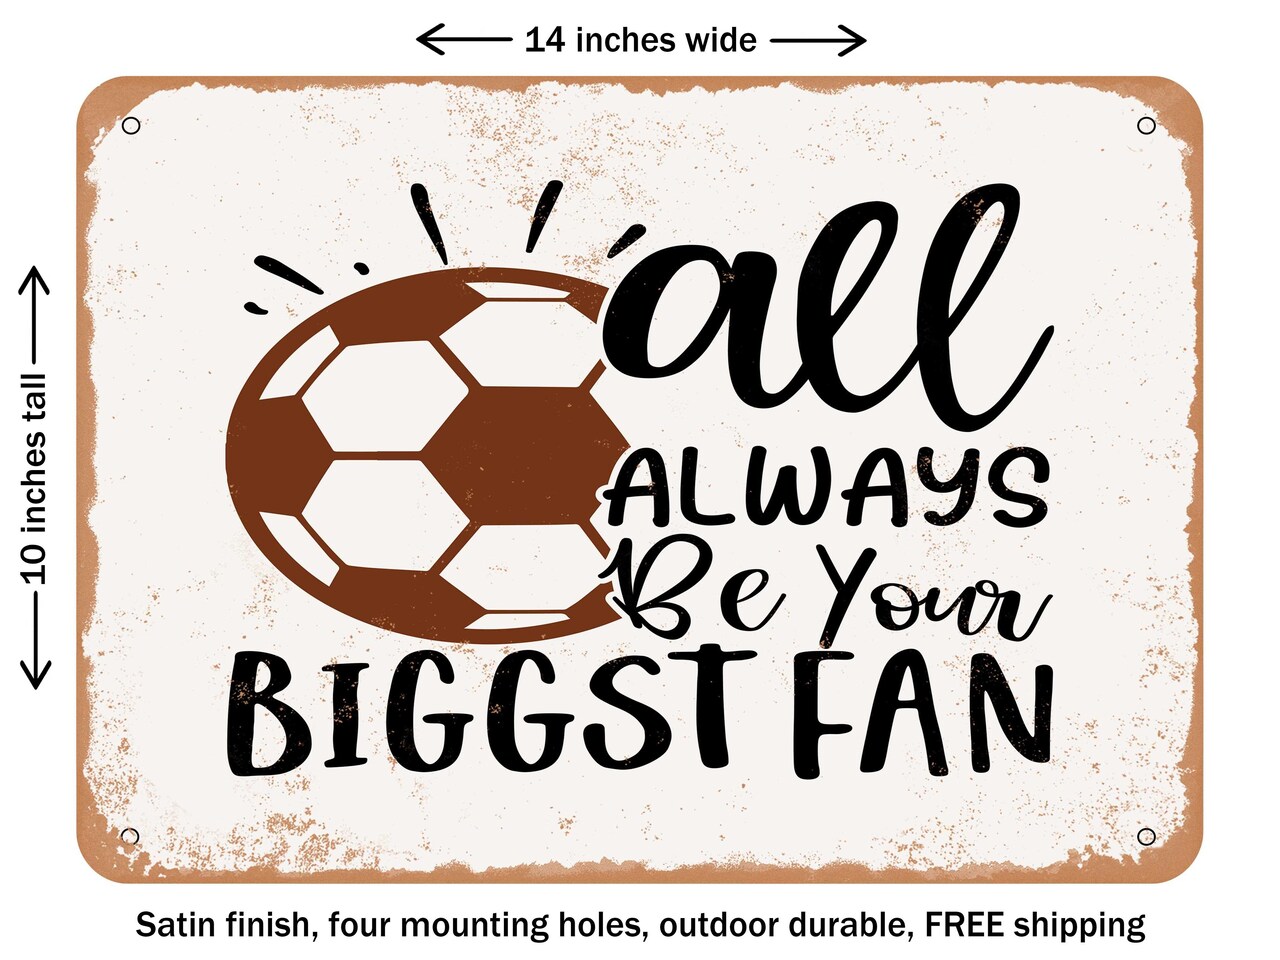 DECORATIVE METAL SIGN - All Always Be Your Biggest Fan - Vintage Rusty Look